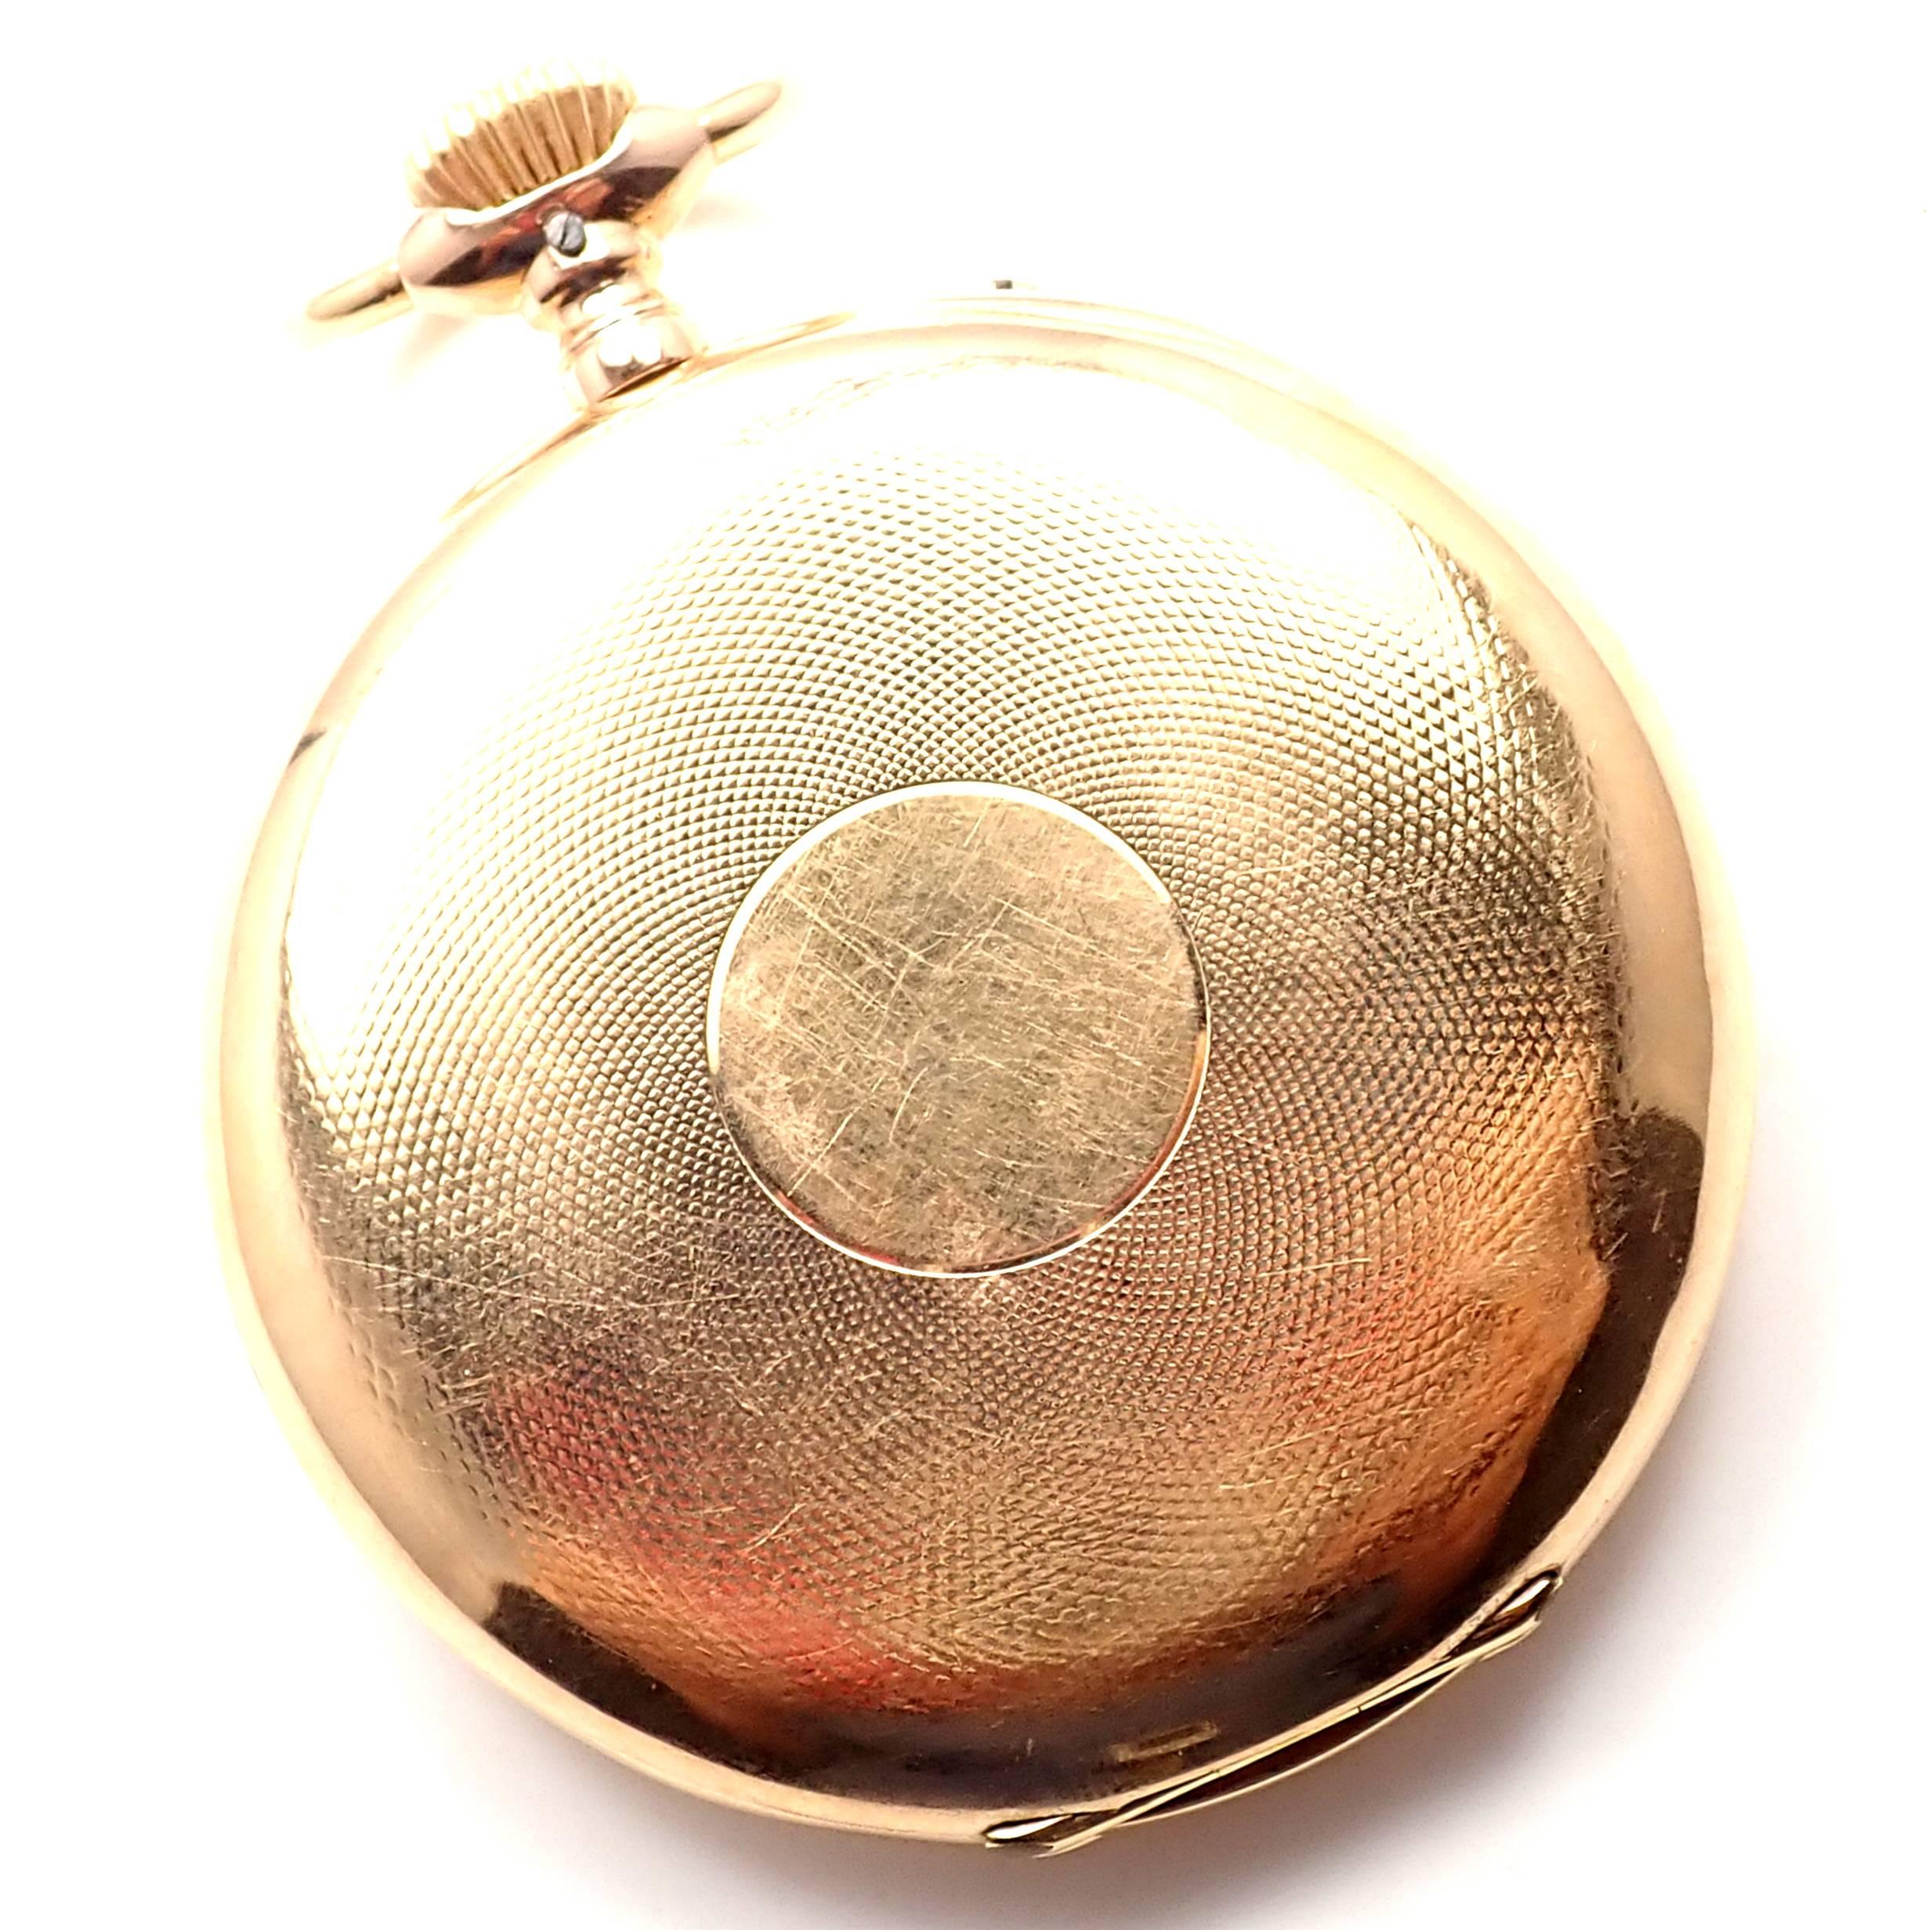 18k yellow gold large 55mm pocket watch by IWC International Watch Co.
This watch works great, fully functional. 
Details:
Case Size: 55mm
Weight: 107.2 grams
Dial: White
Movement: Manual Wind
Stamped Hallmarks: International Watch Co 18k 509694